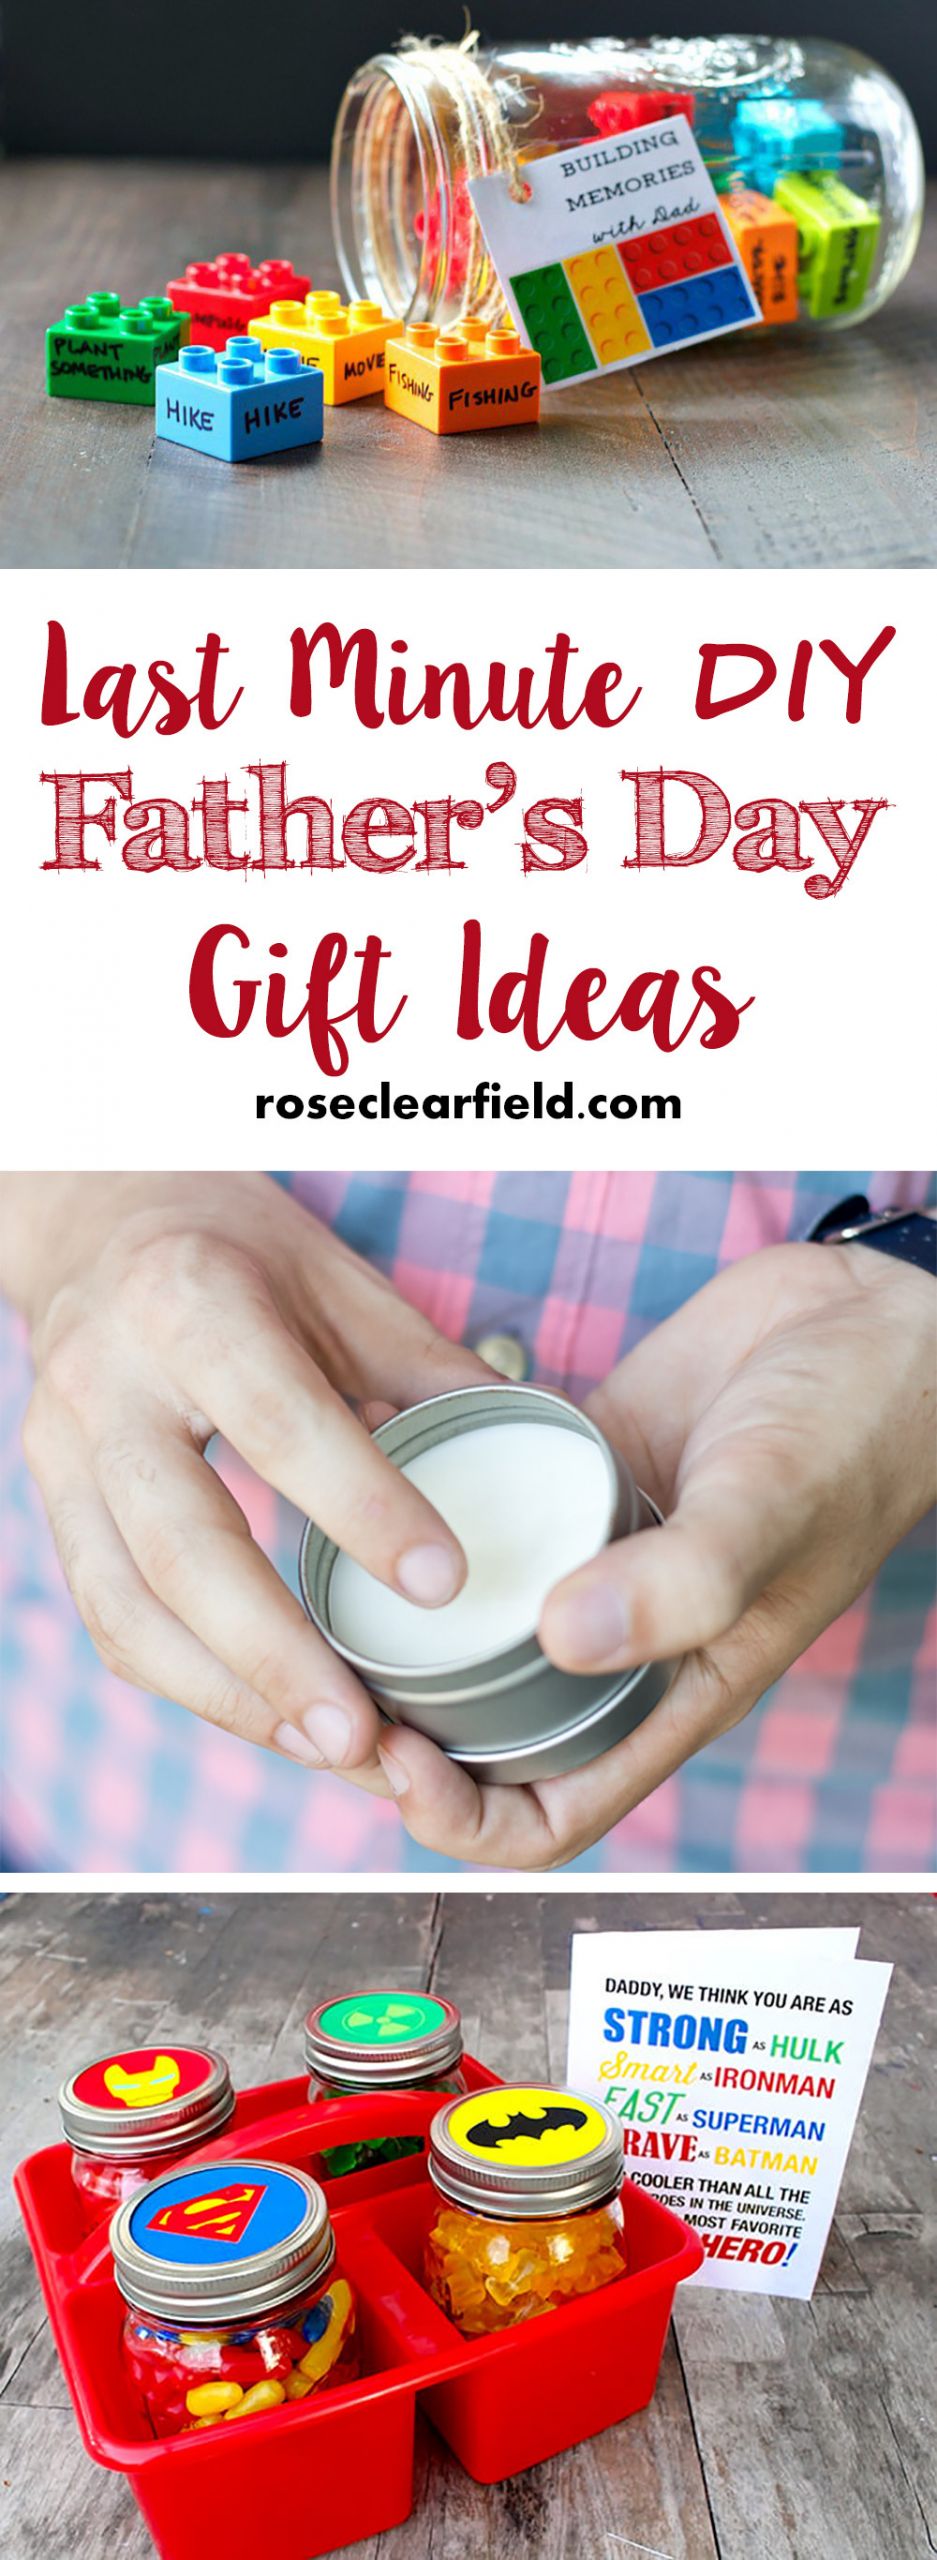 Diy Fathers Day Gifts
 Last Minute DIY Father s Day Gift Ideas • Rose Clearfield